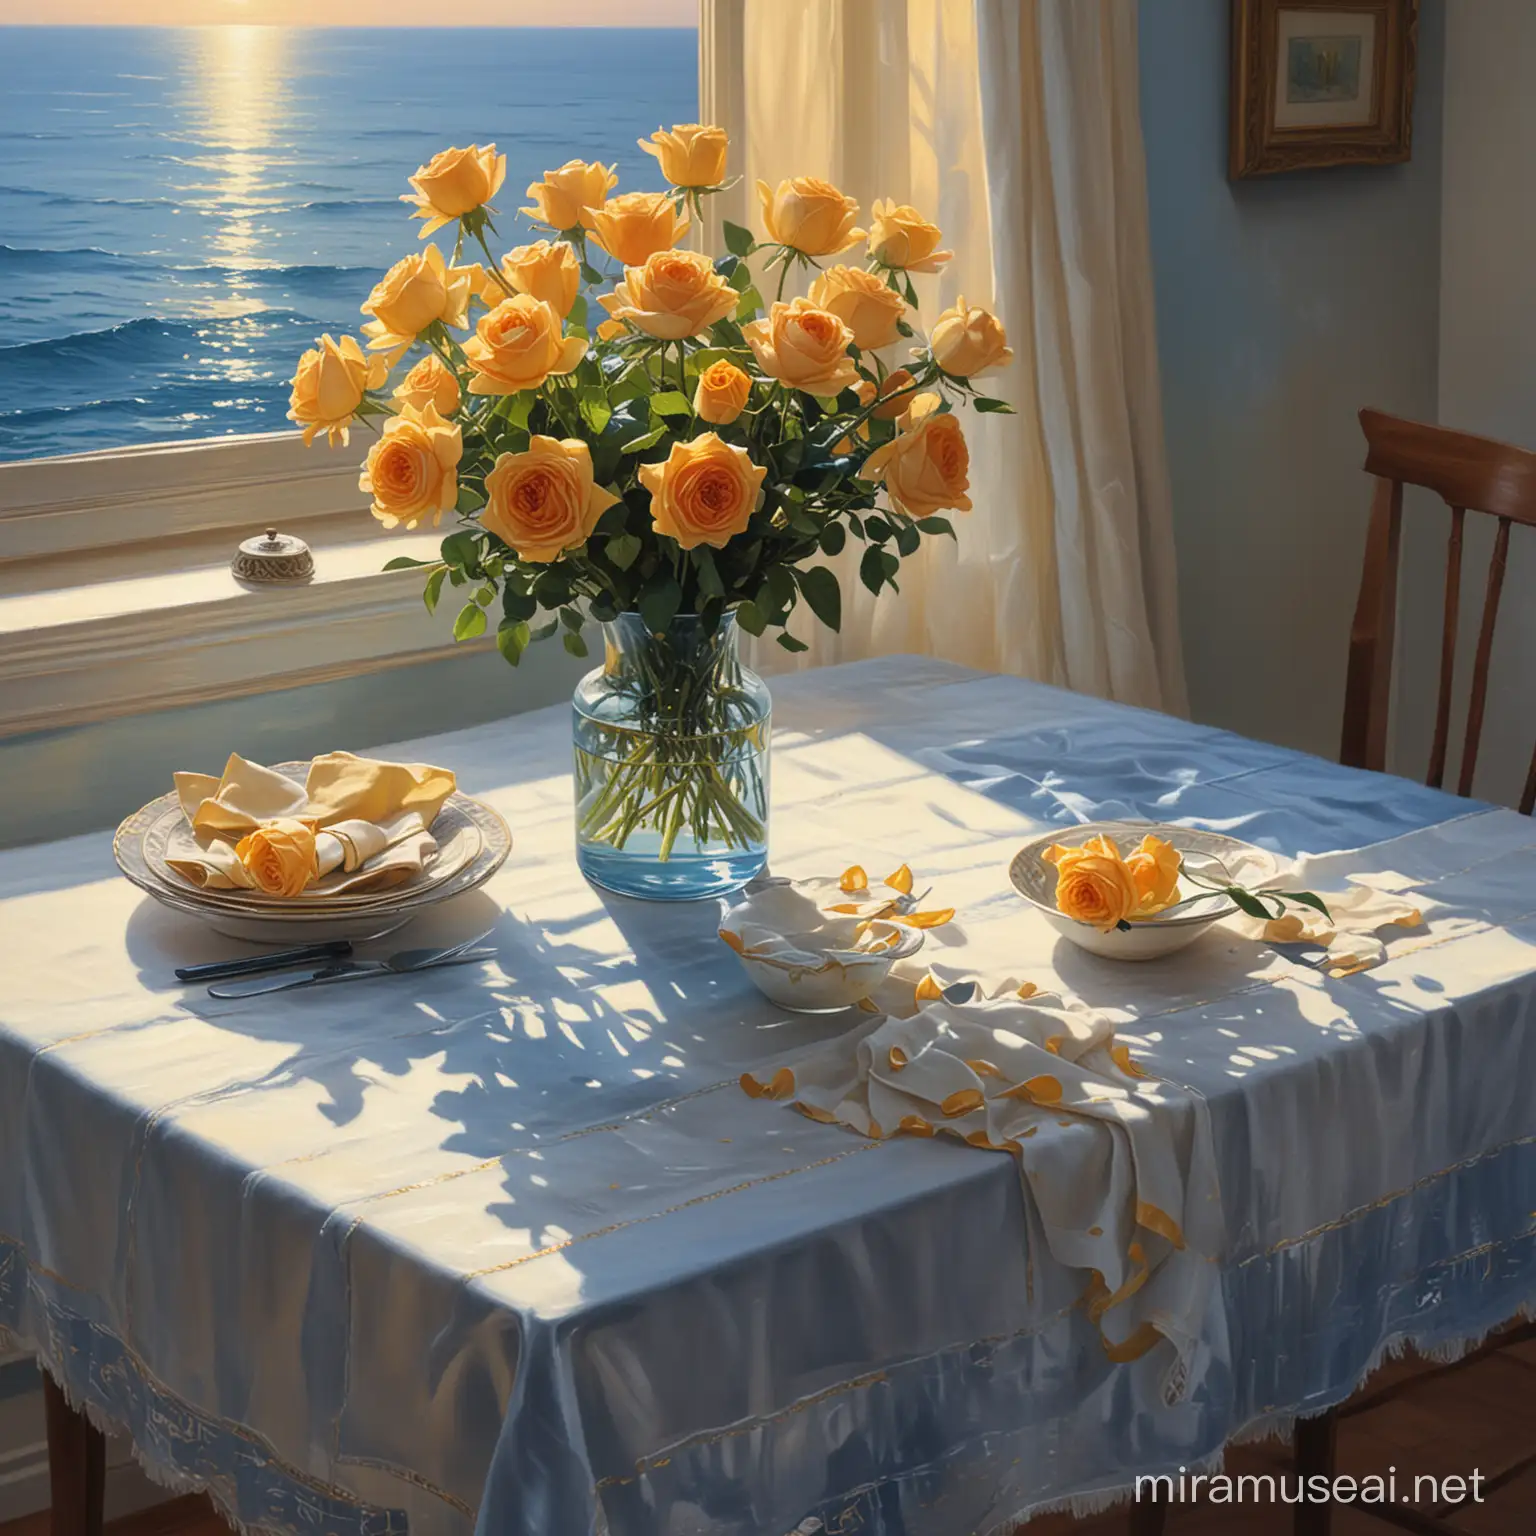 Tranquil Sunset Seascape with Roses in Glass Vase